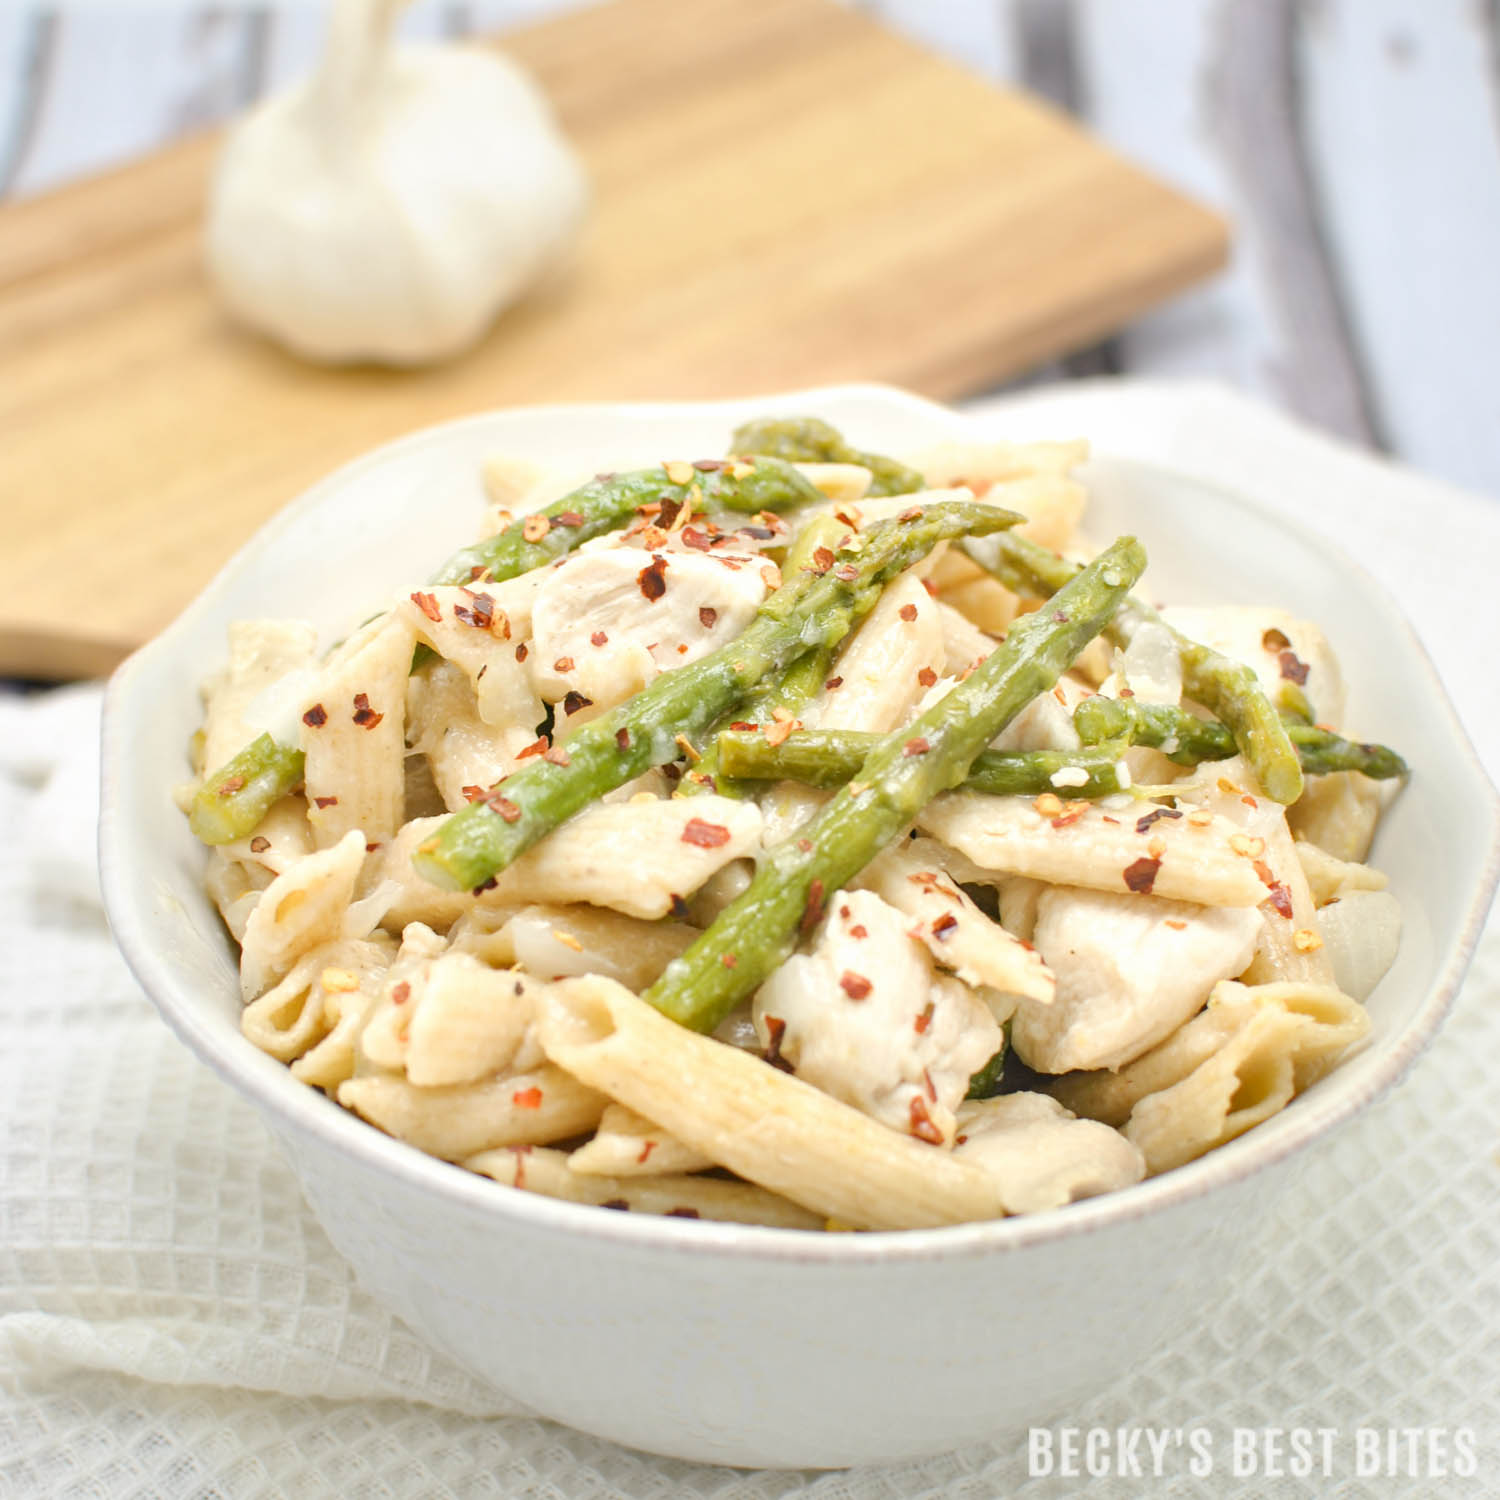 Easy Lemon Garlic Chicken Pasta with Asparagus is a healthy, weeknight dinner recipe with fresh spring flavors for a meal that the whole family will love! | beckysbestbites.com